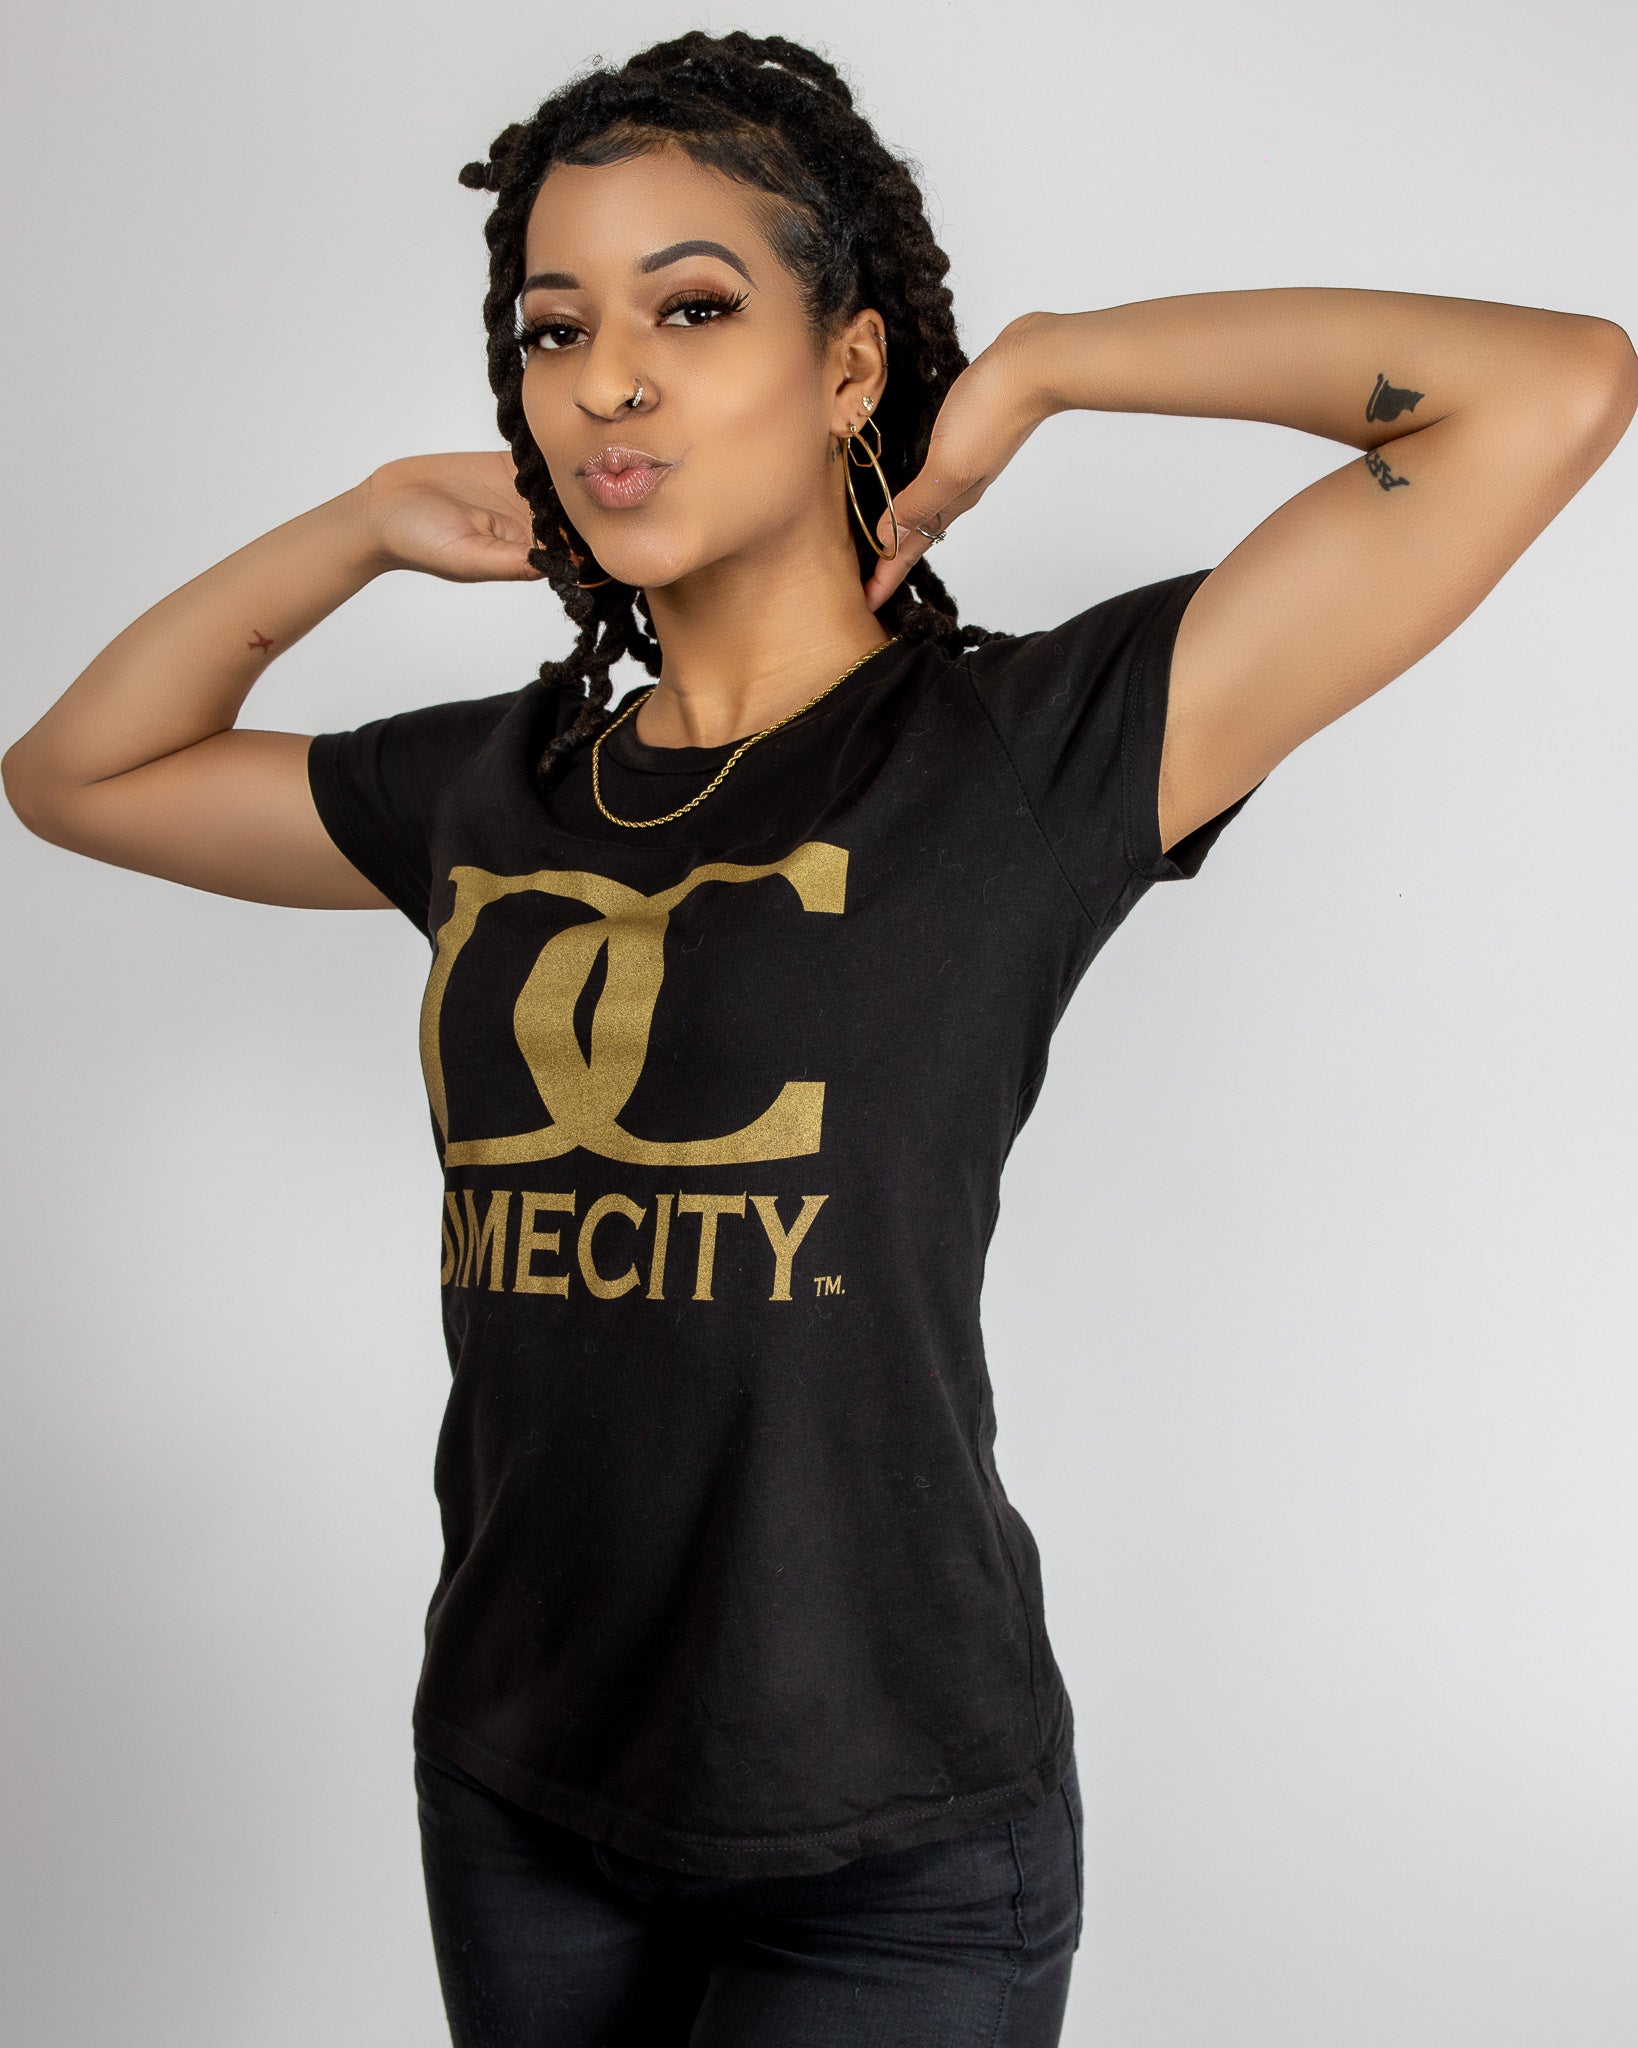 Women's Luxury Short-Sleeve T-shirt With Logoby Dime City Apparel